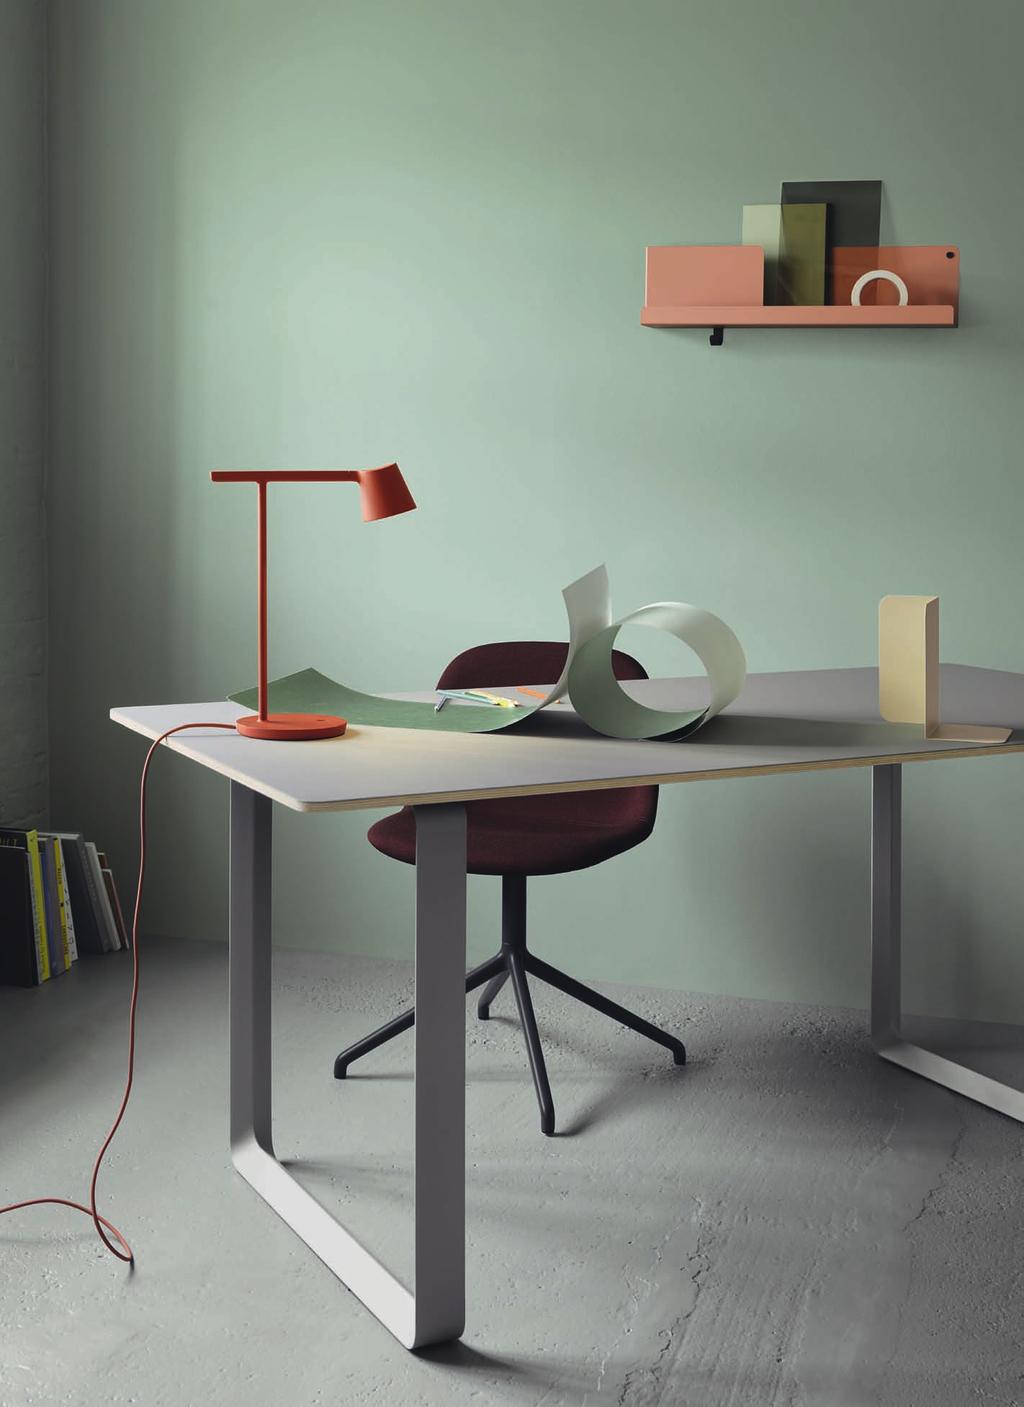 TIP LAMP by Jens Fager p. 60 70/70 TABLE by TAF Architects p.